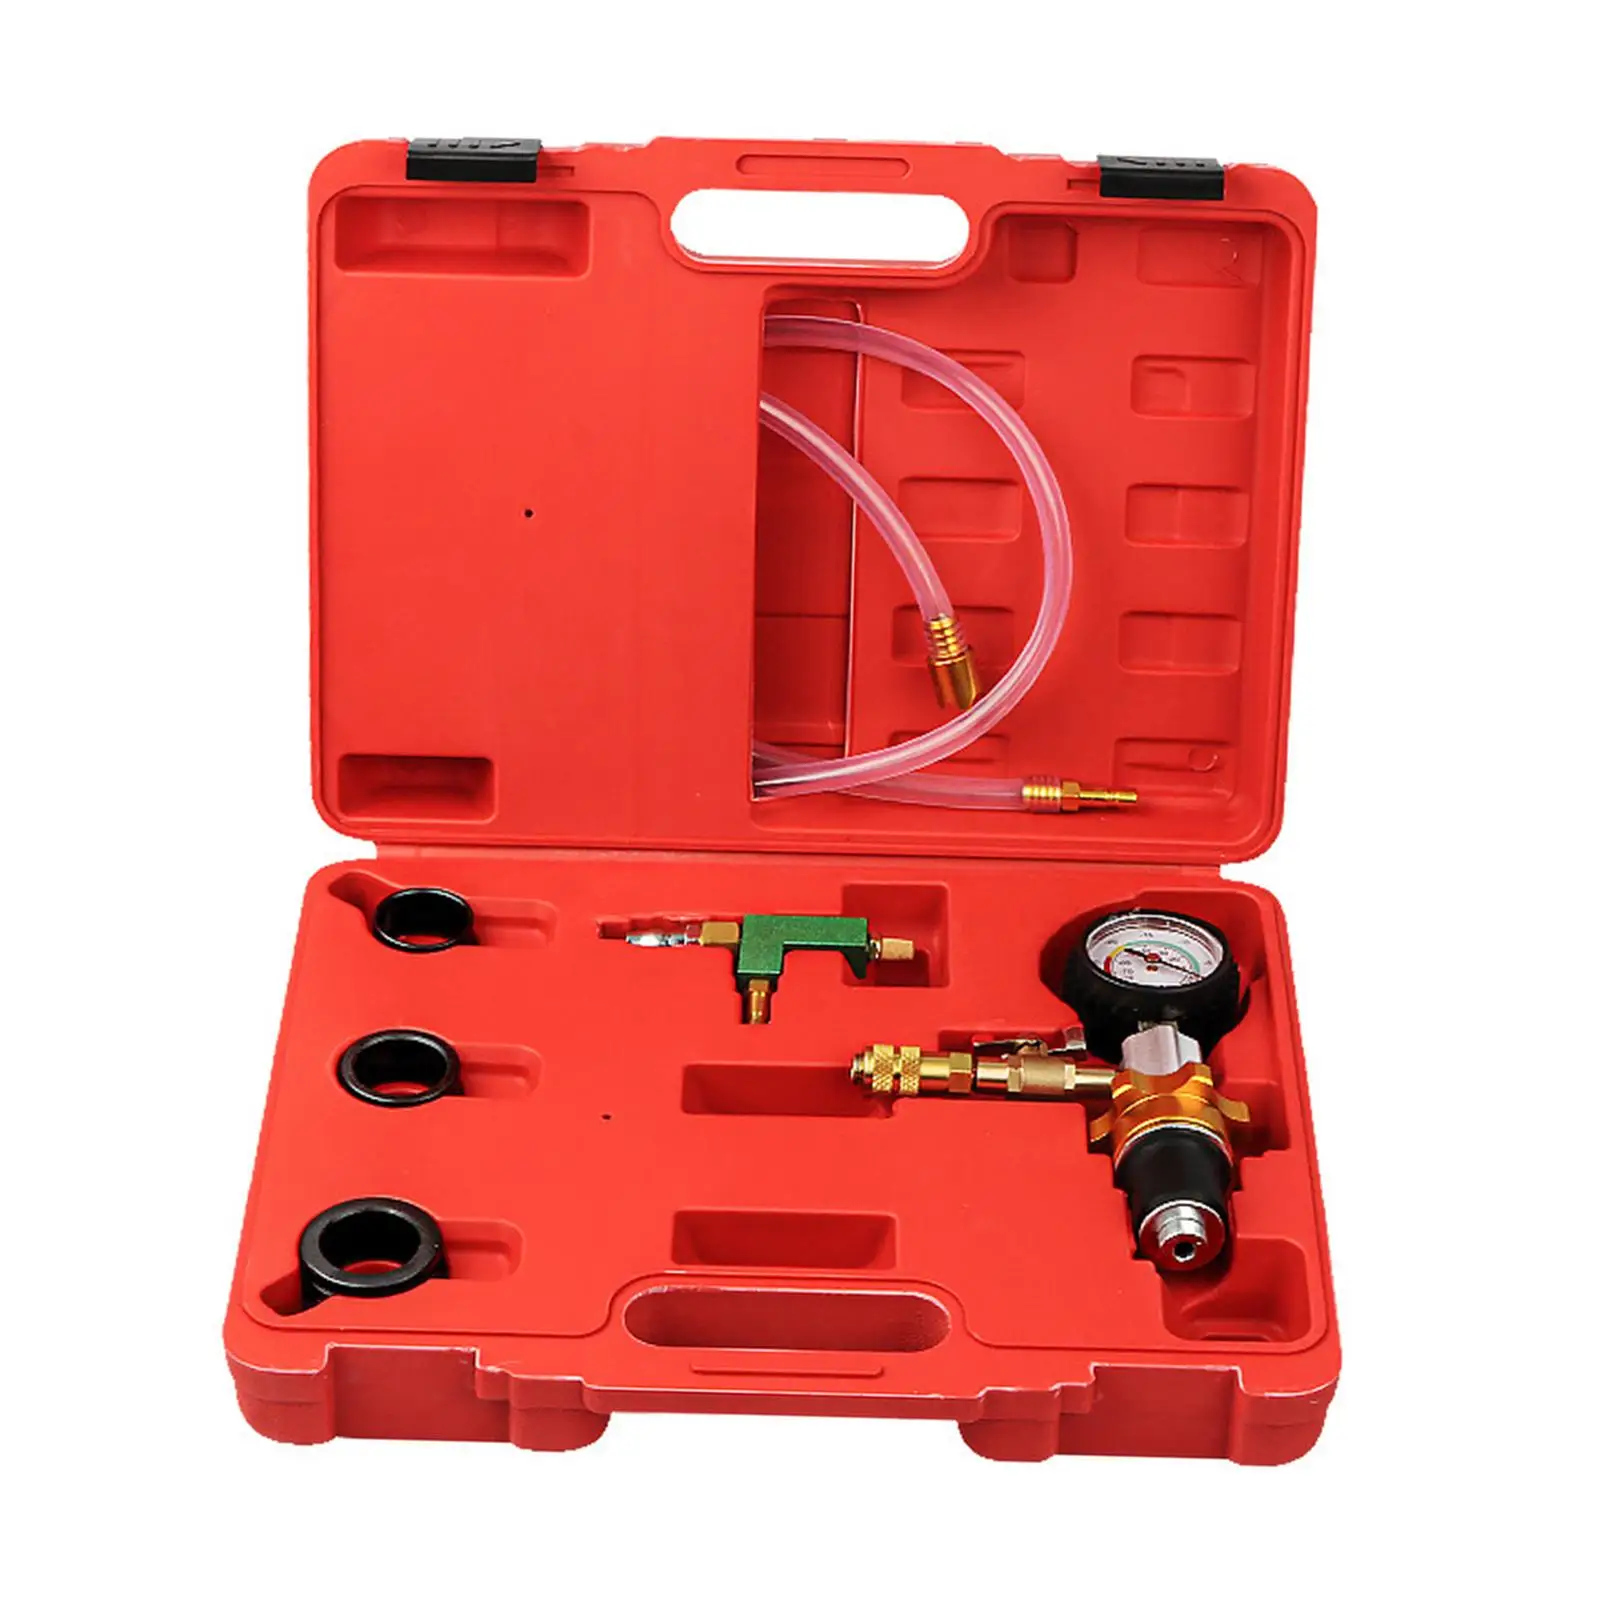 Vacuum Coolant Refill Tool set Brass Connector Leak Tester for Vehicle